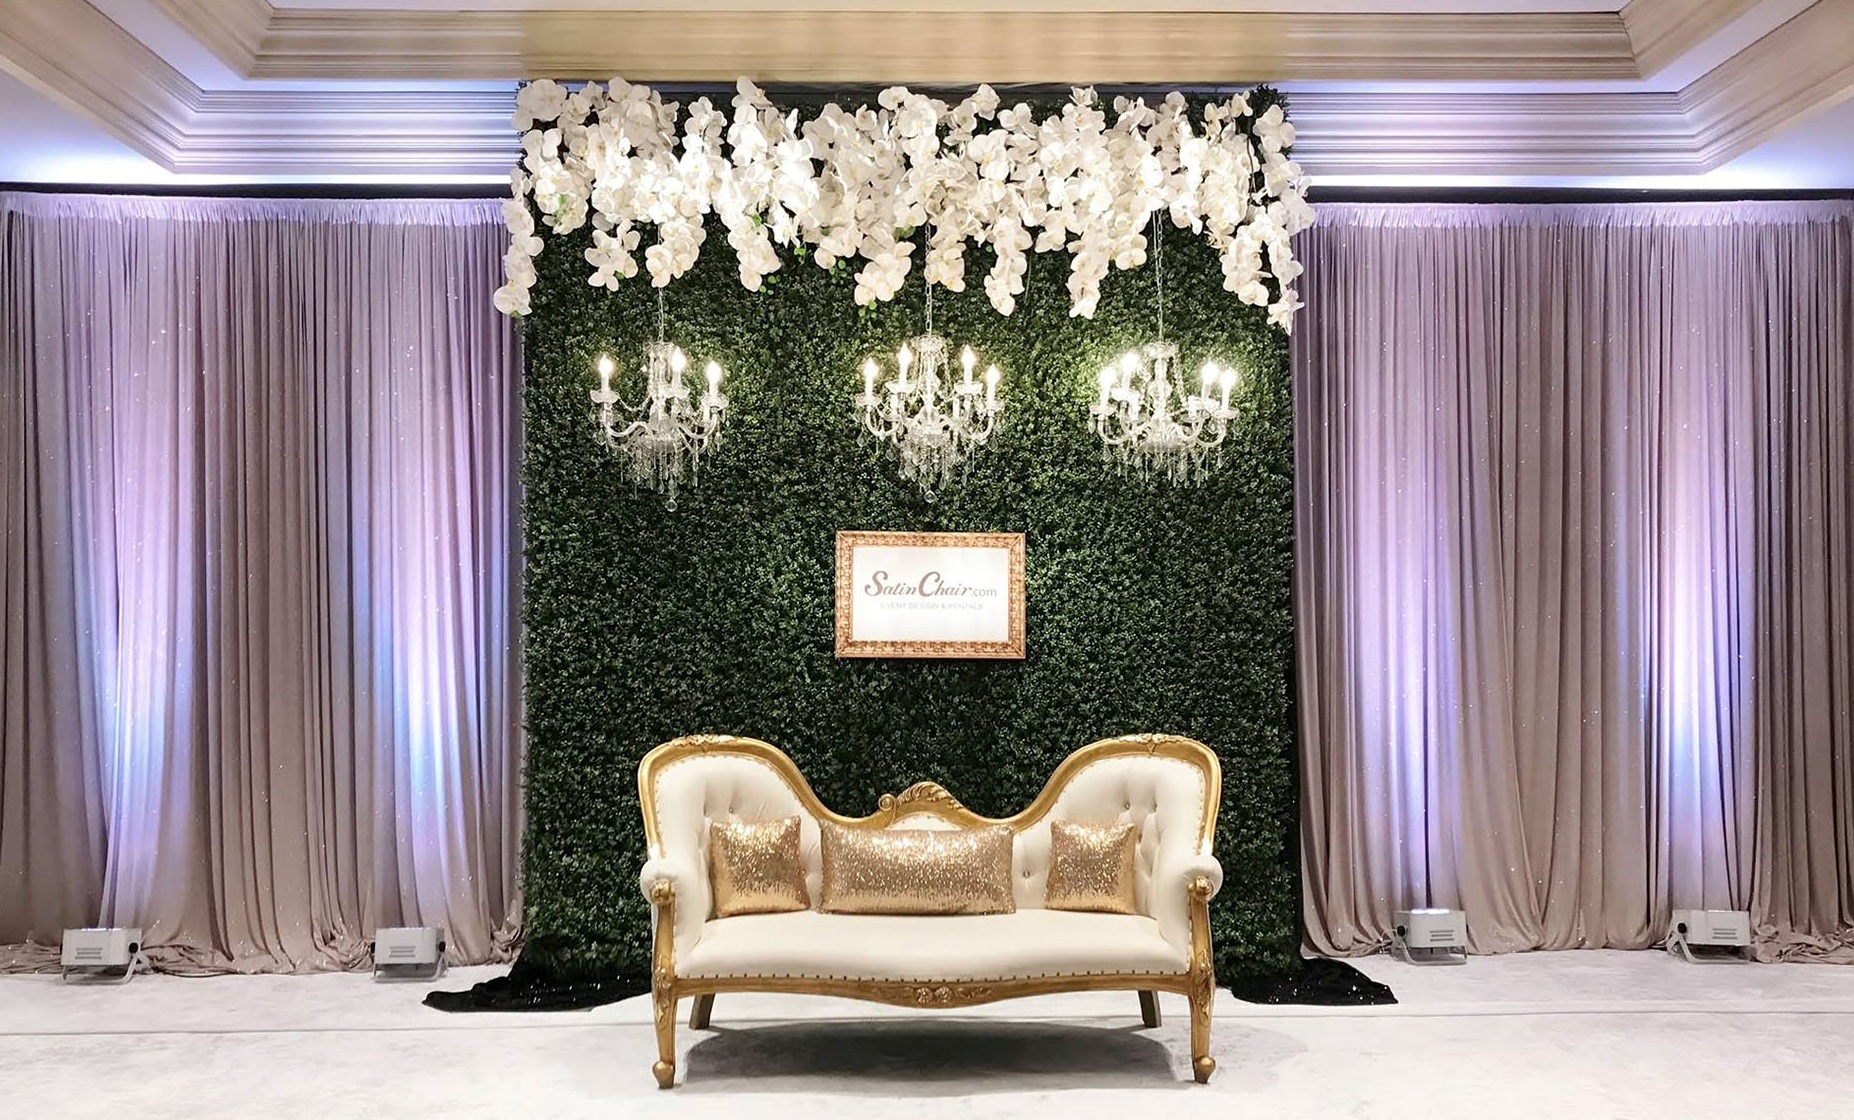 Chicago Backdrops Draping Satinchair Com Chicago Event And Wedding Decor